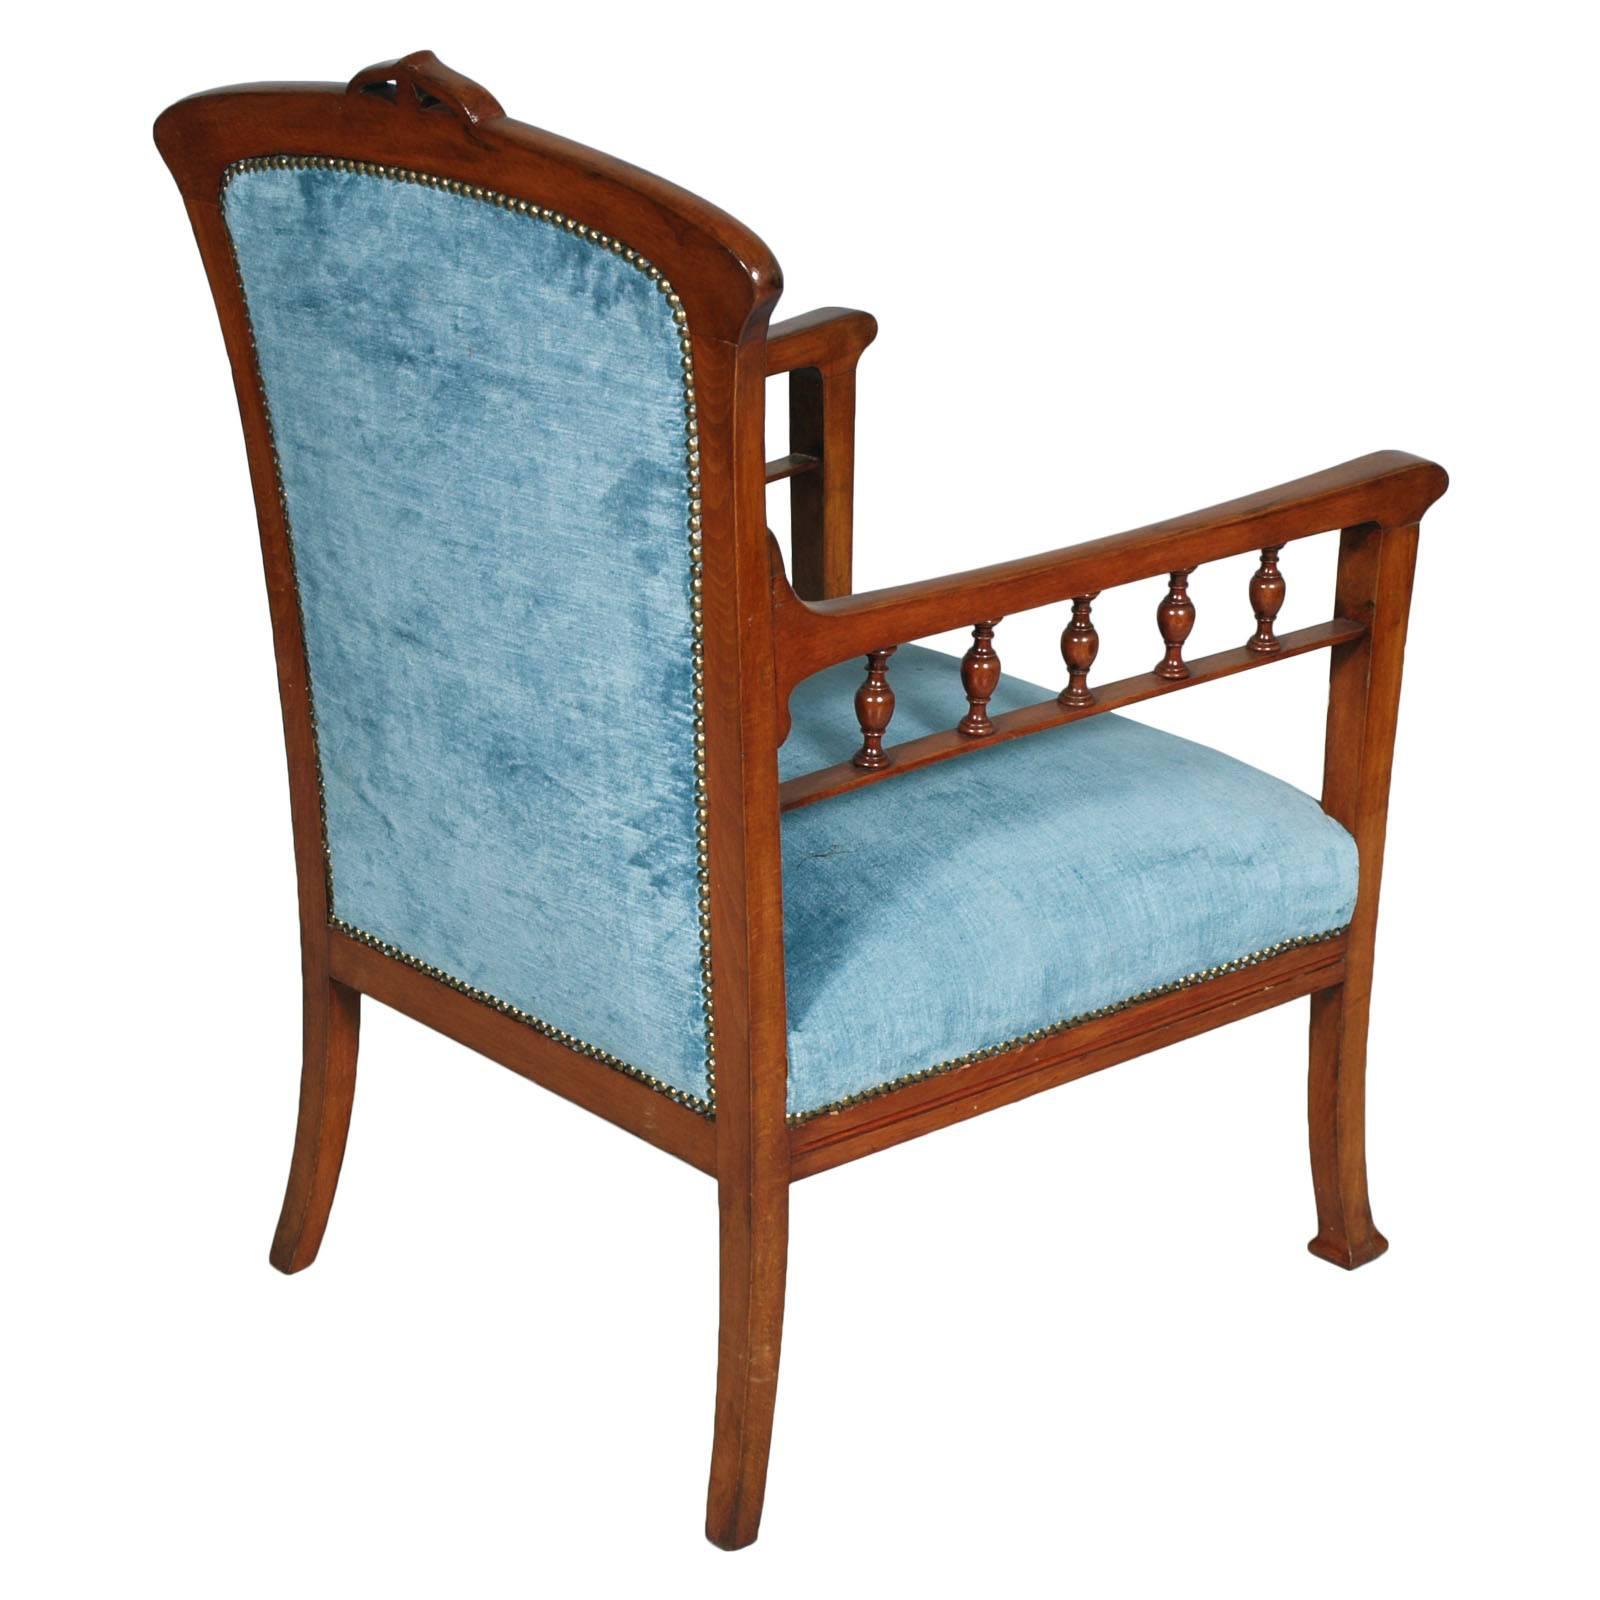 Code: FL25

Elegant original Italian Art Nouveau armchair in solid blond walnut with, new Velvet Upholstered, The style is that of Eugenio Quarti (1867-1929) - Italian Furniture & Cabinet Maker in the Stile Liberty (Art Nouveau Style). Quarti Worked